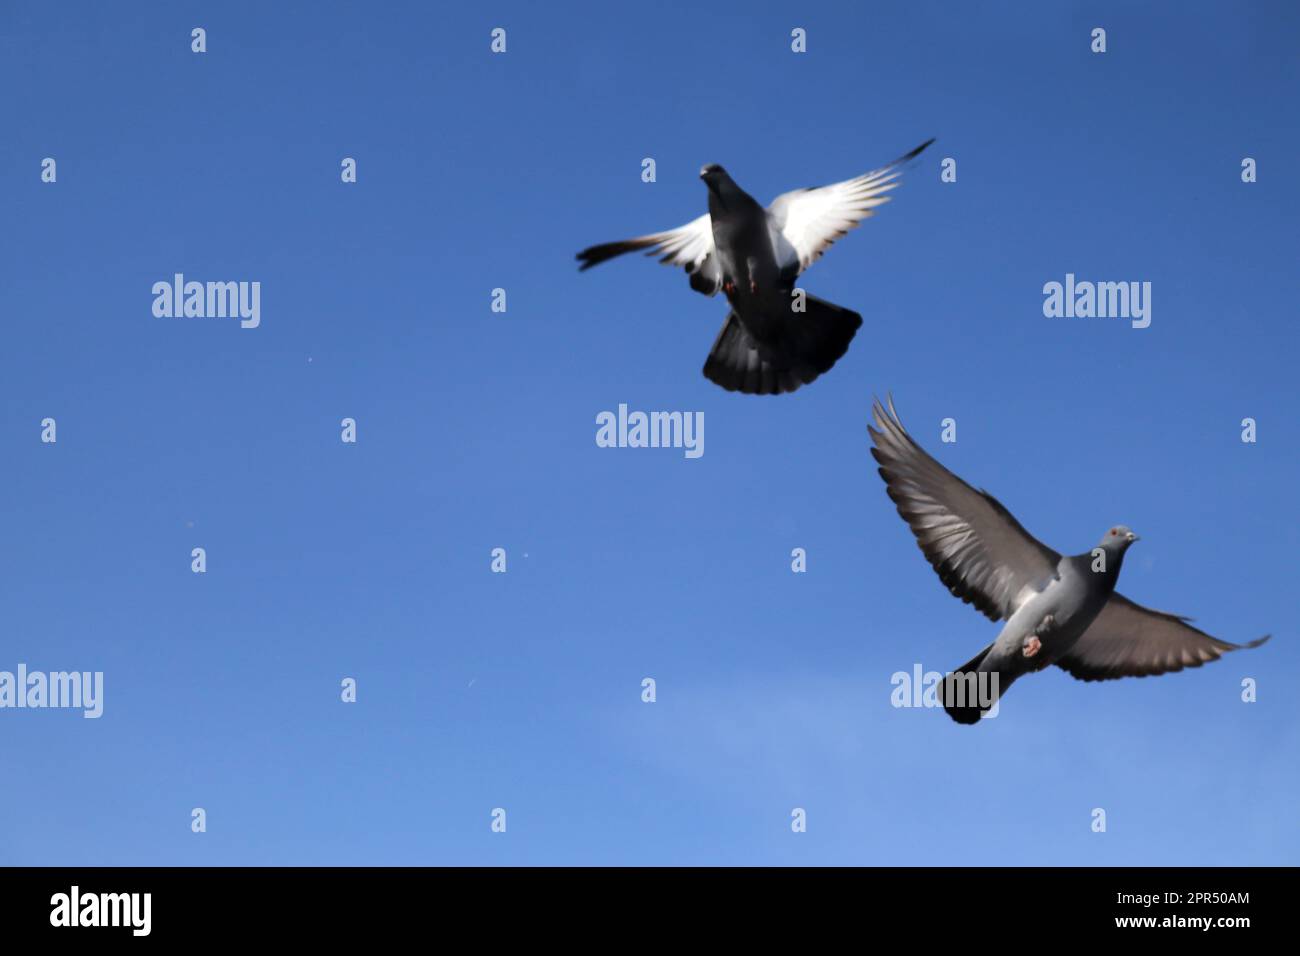 A flock of pieons captured in flight Stock Photo